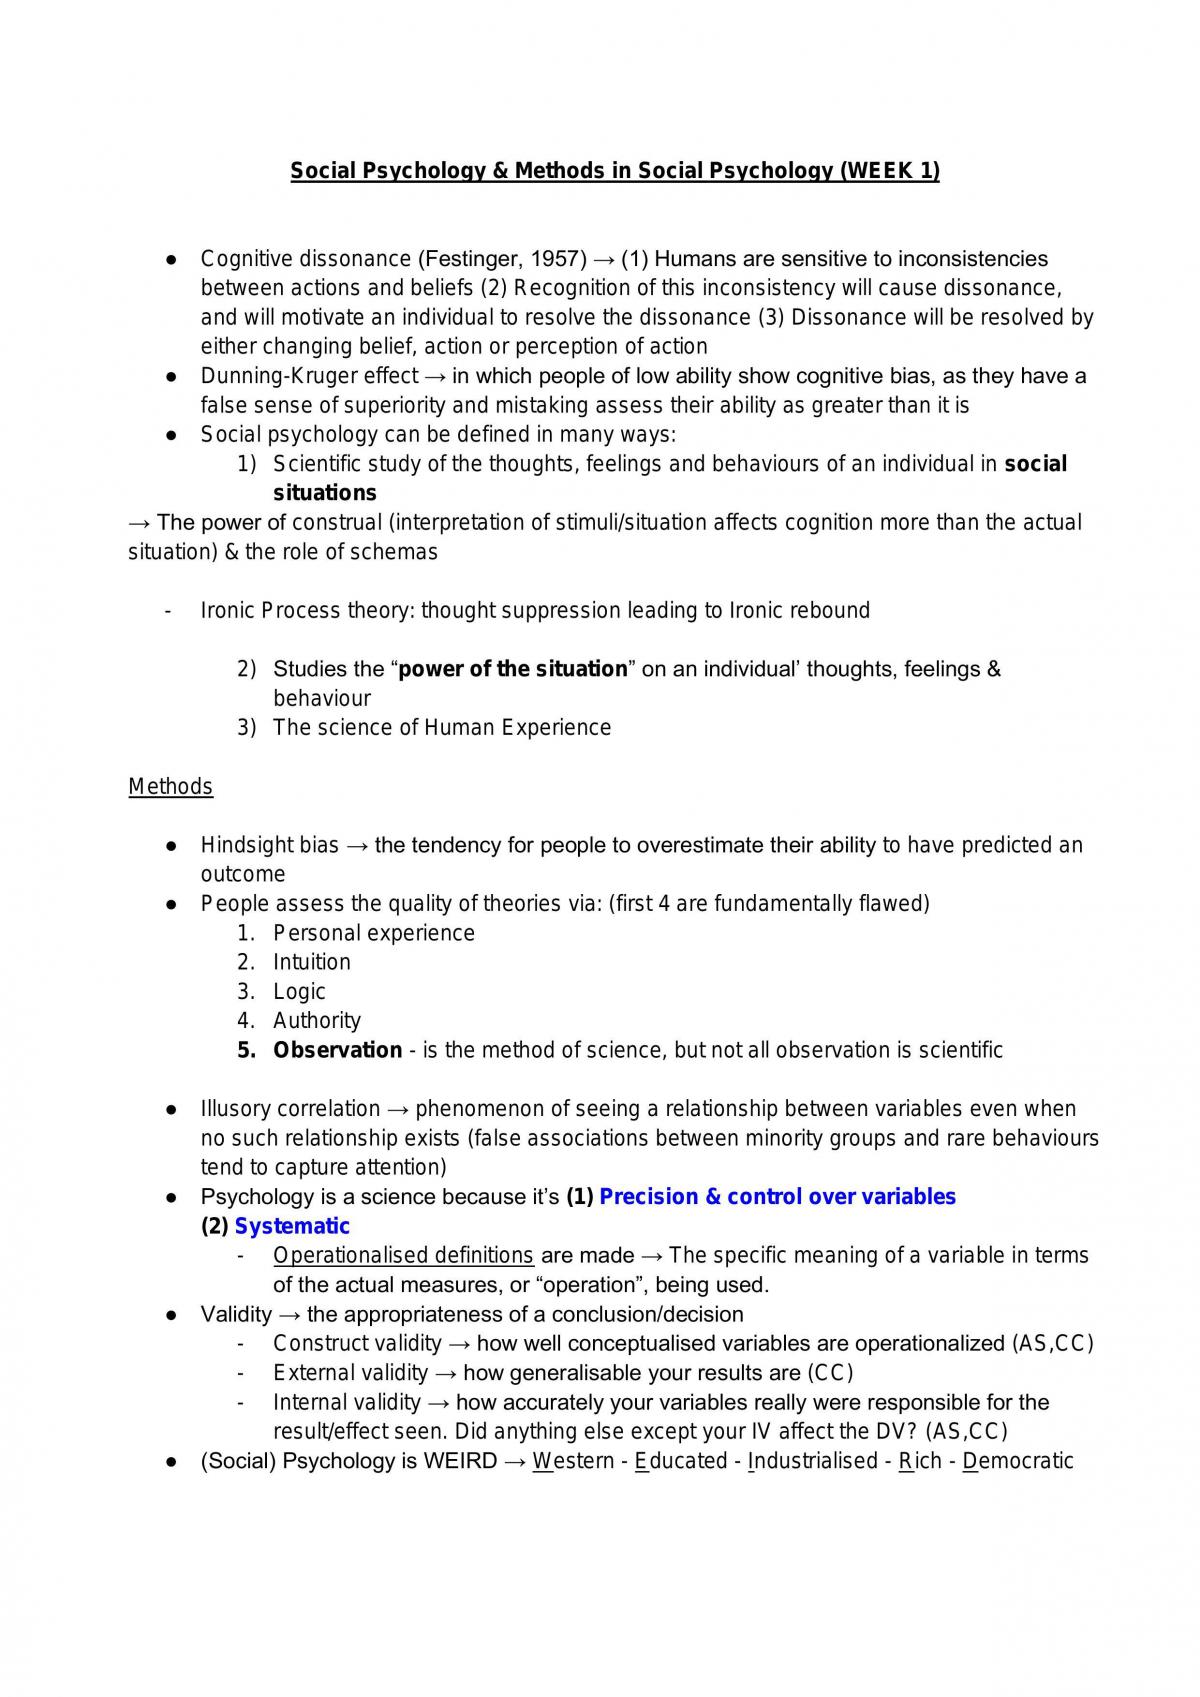 PS220 Social Psychology Revision Notes - Page 1